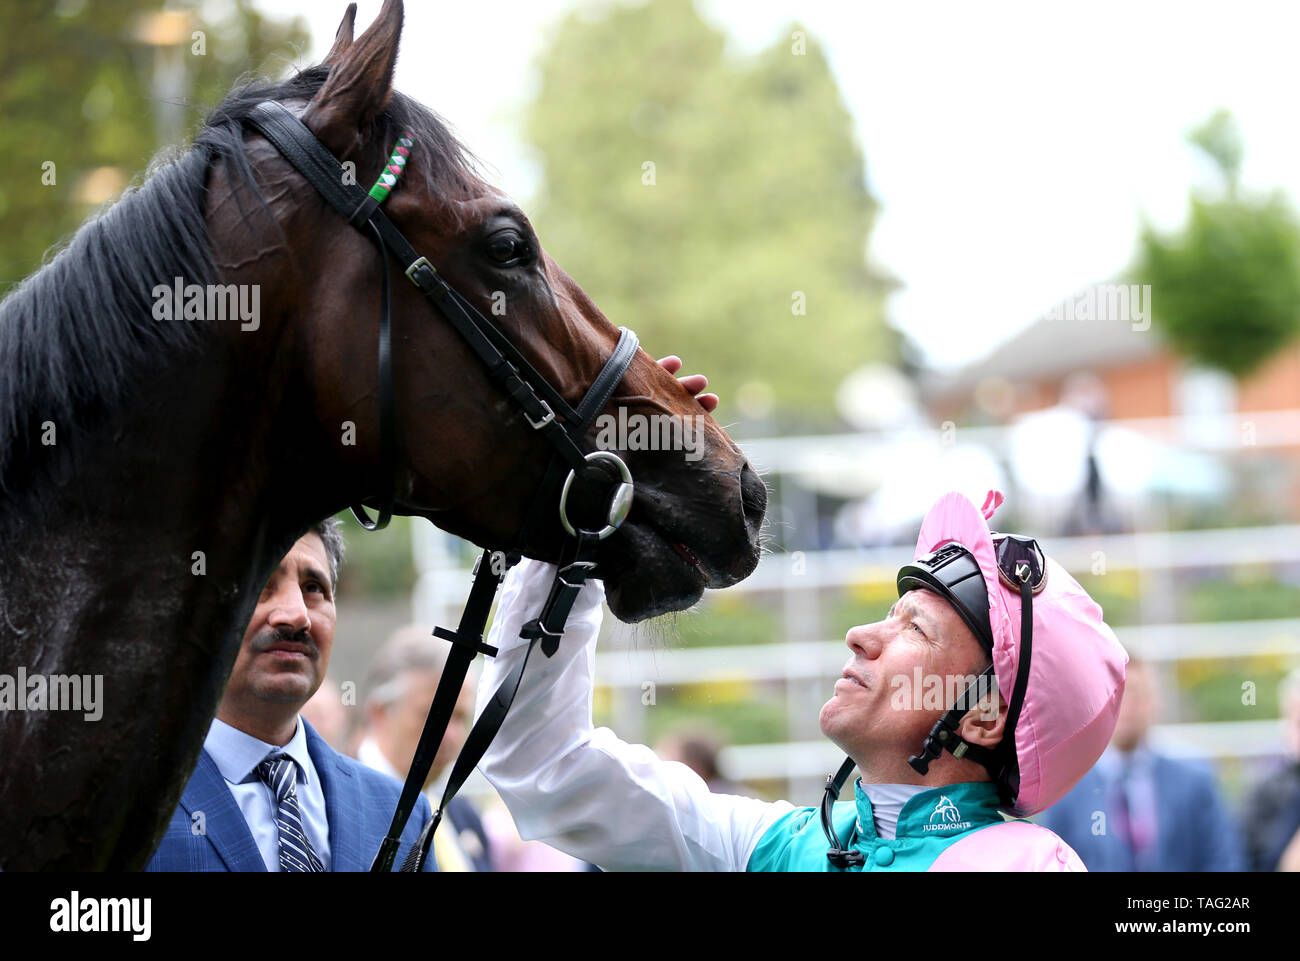 Jockey Frankie Dettori after winning the Merriebelle Stable Commonwealth Cup Trial Stakes on Calyx in the winners parade during Royal Ascot Trials Day at Ascot Racecourse Stock Photo